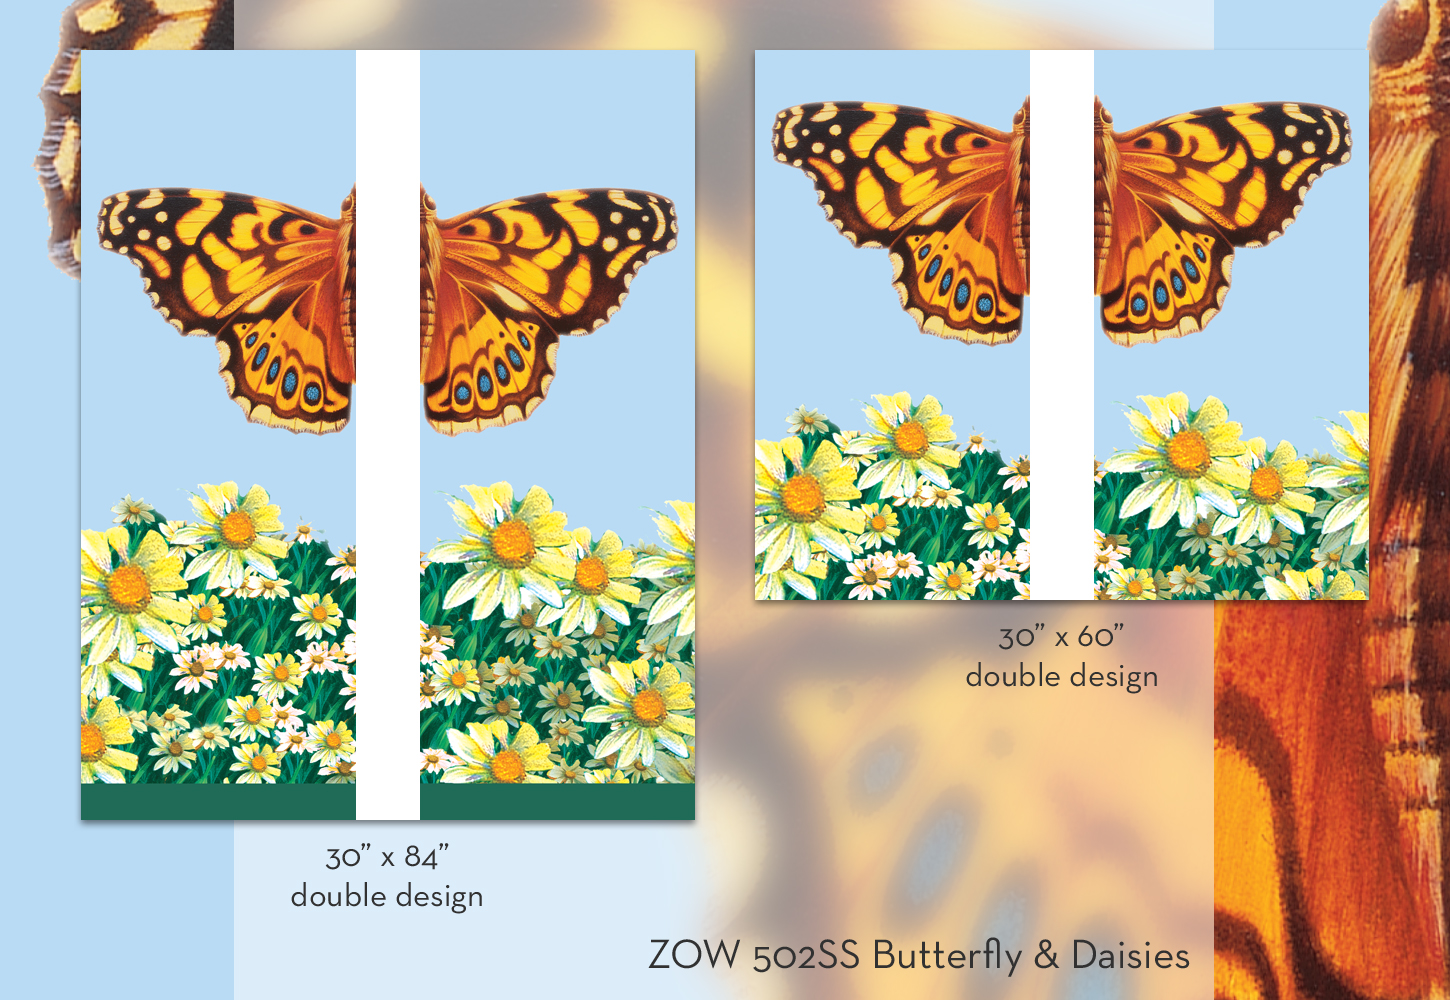 ZOW 502SS Butterfly & Daisies